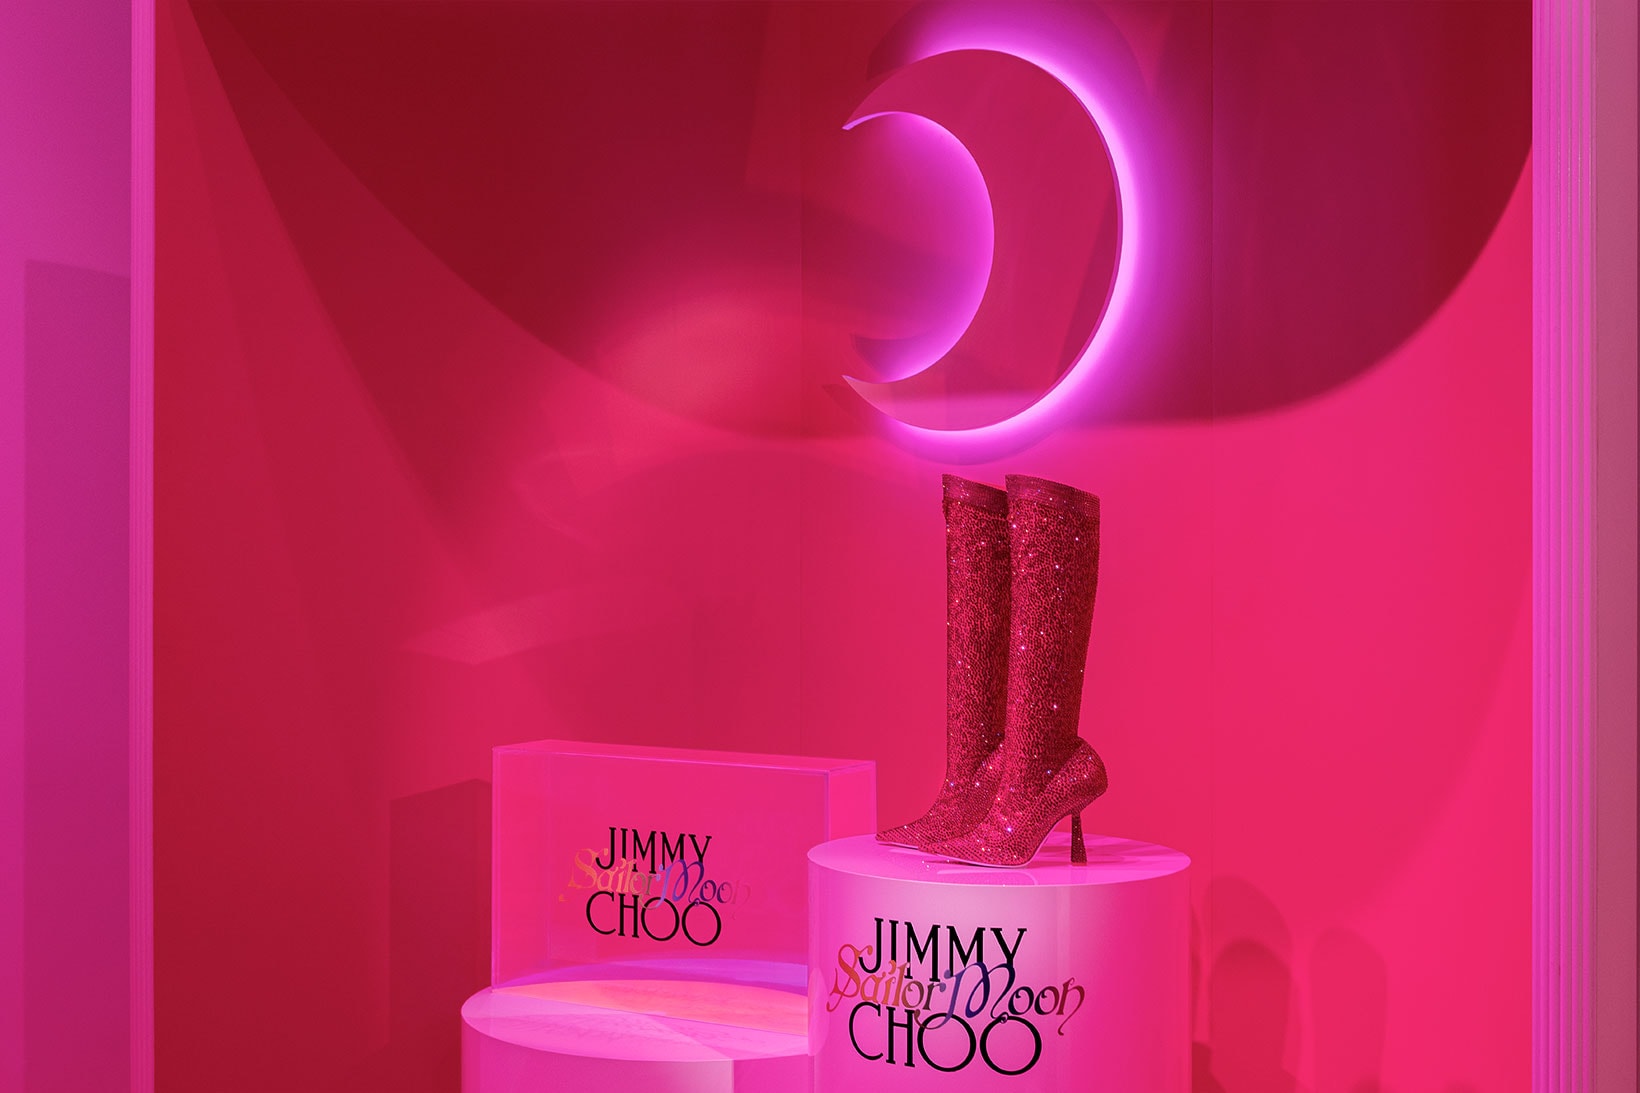 Jimmy Choo x Sailor Moon footwear collection: Where to buy